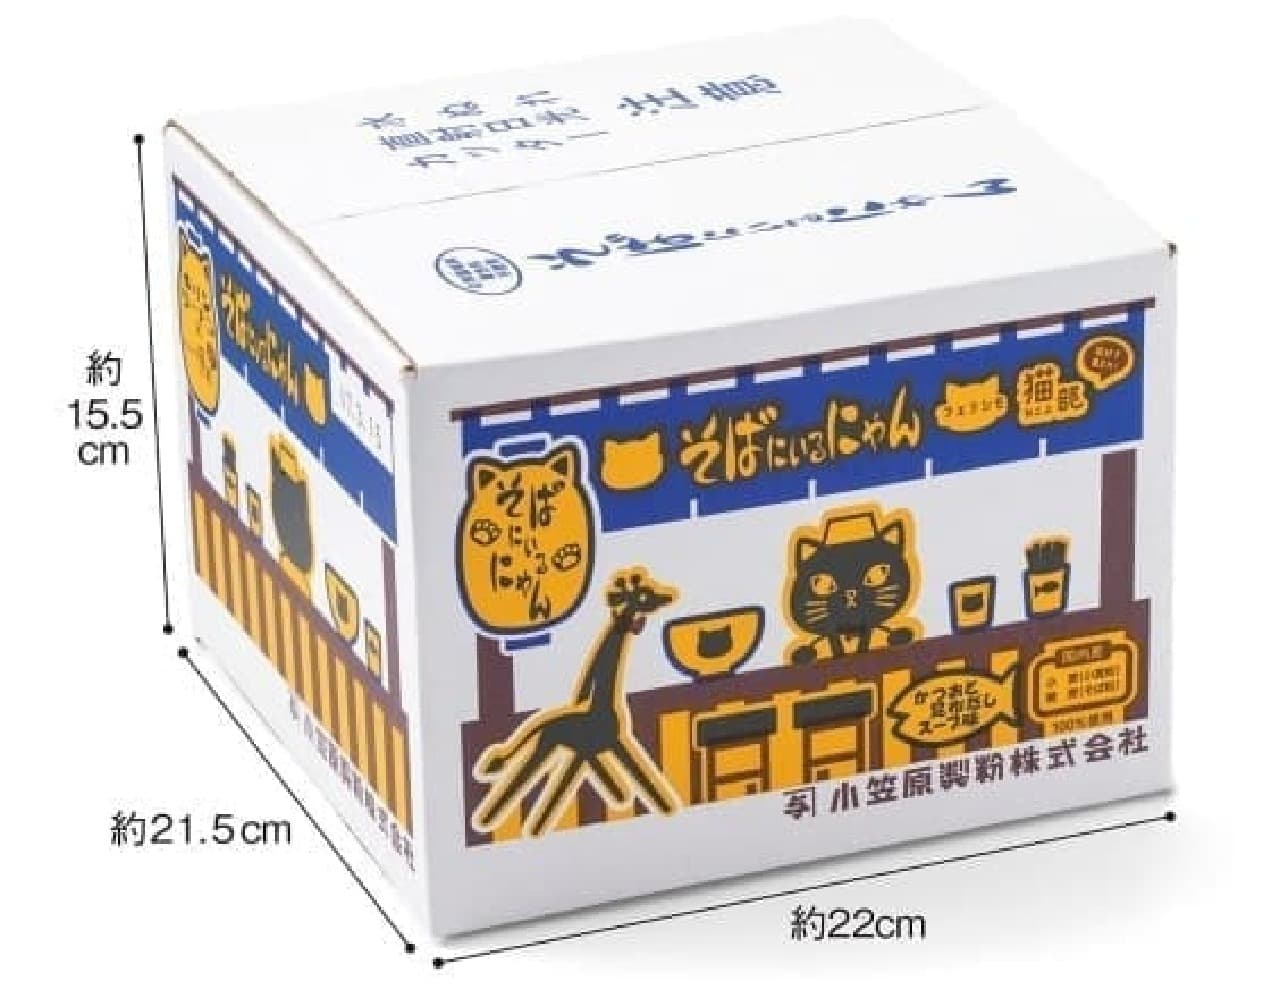 Soba for cat lovers "Nyan by the side"